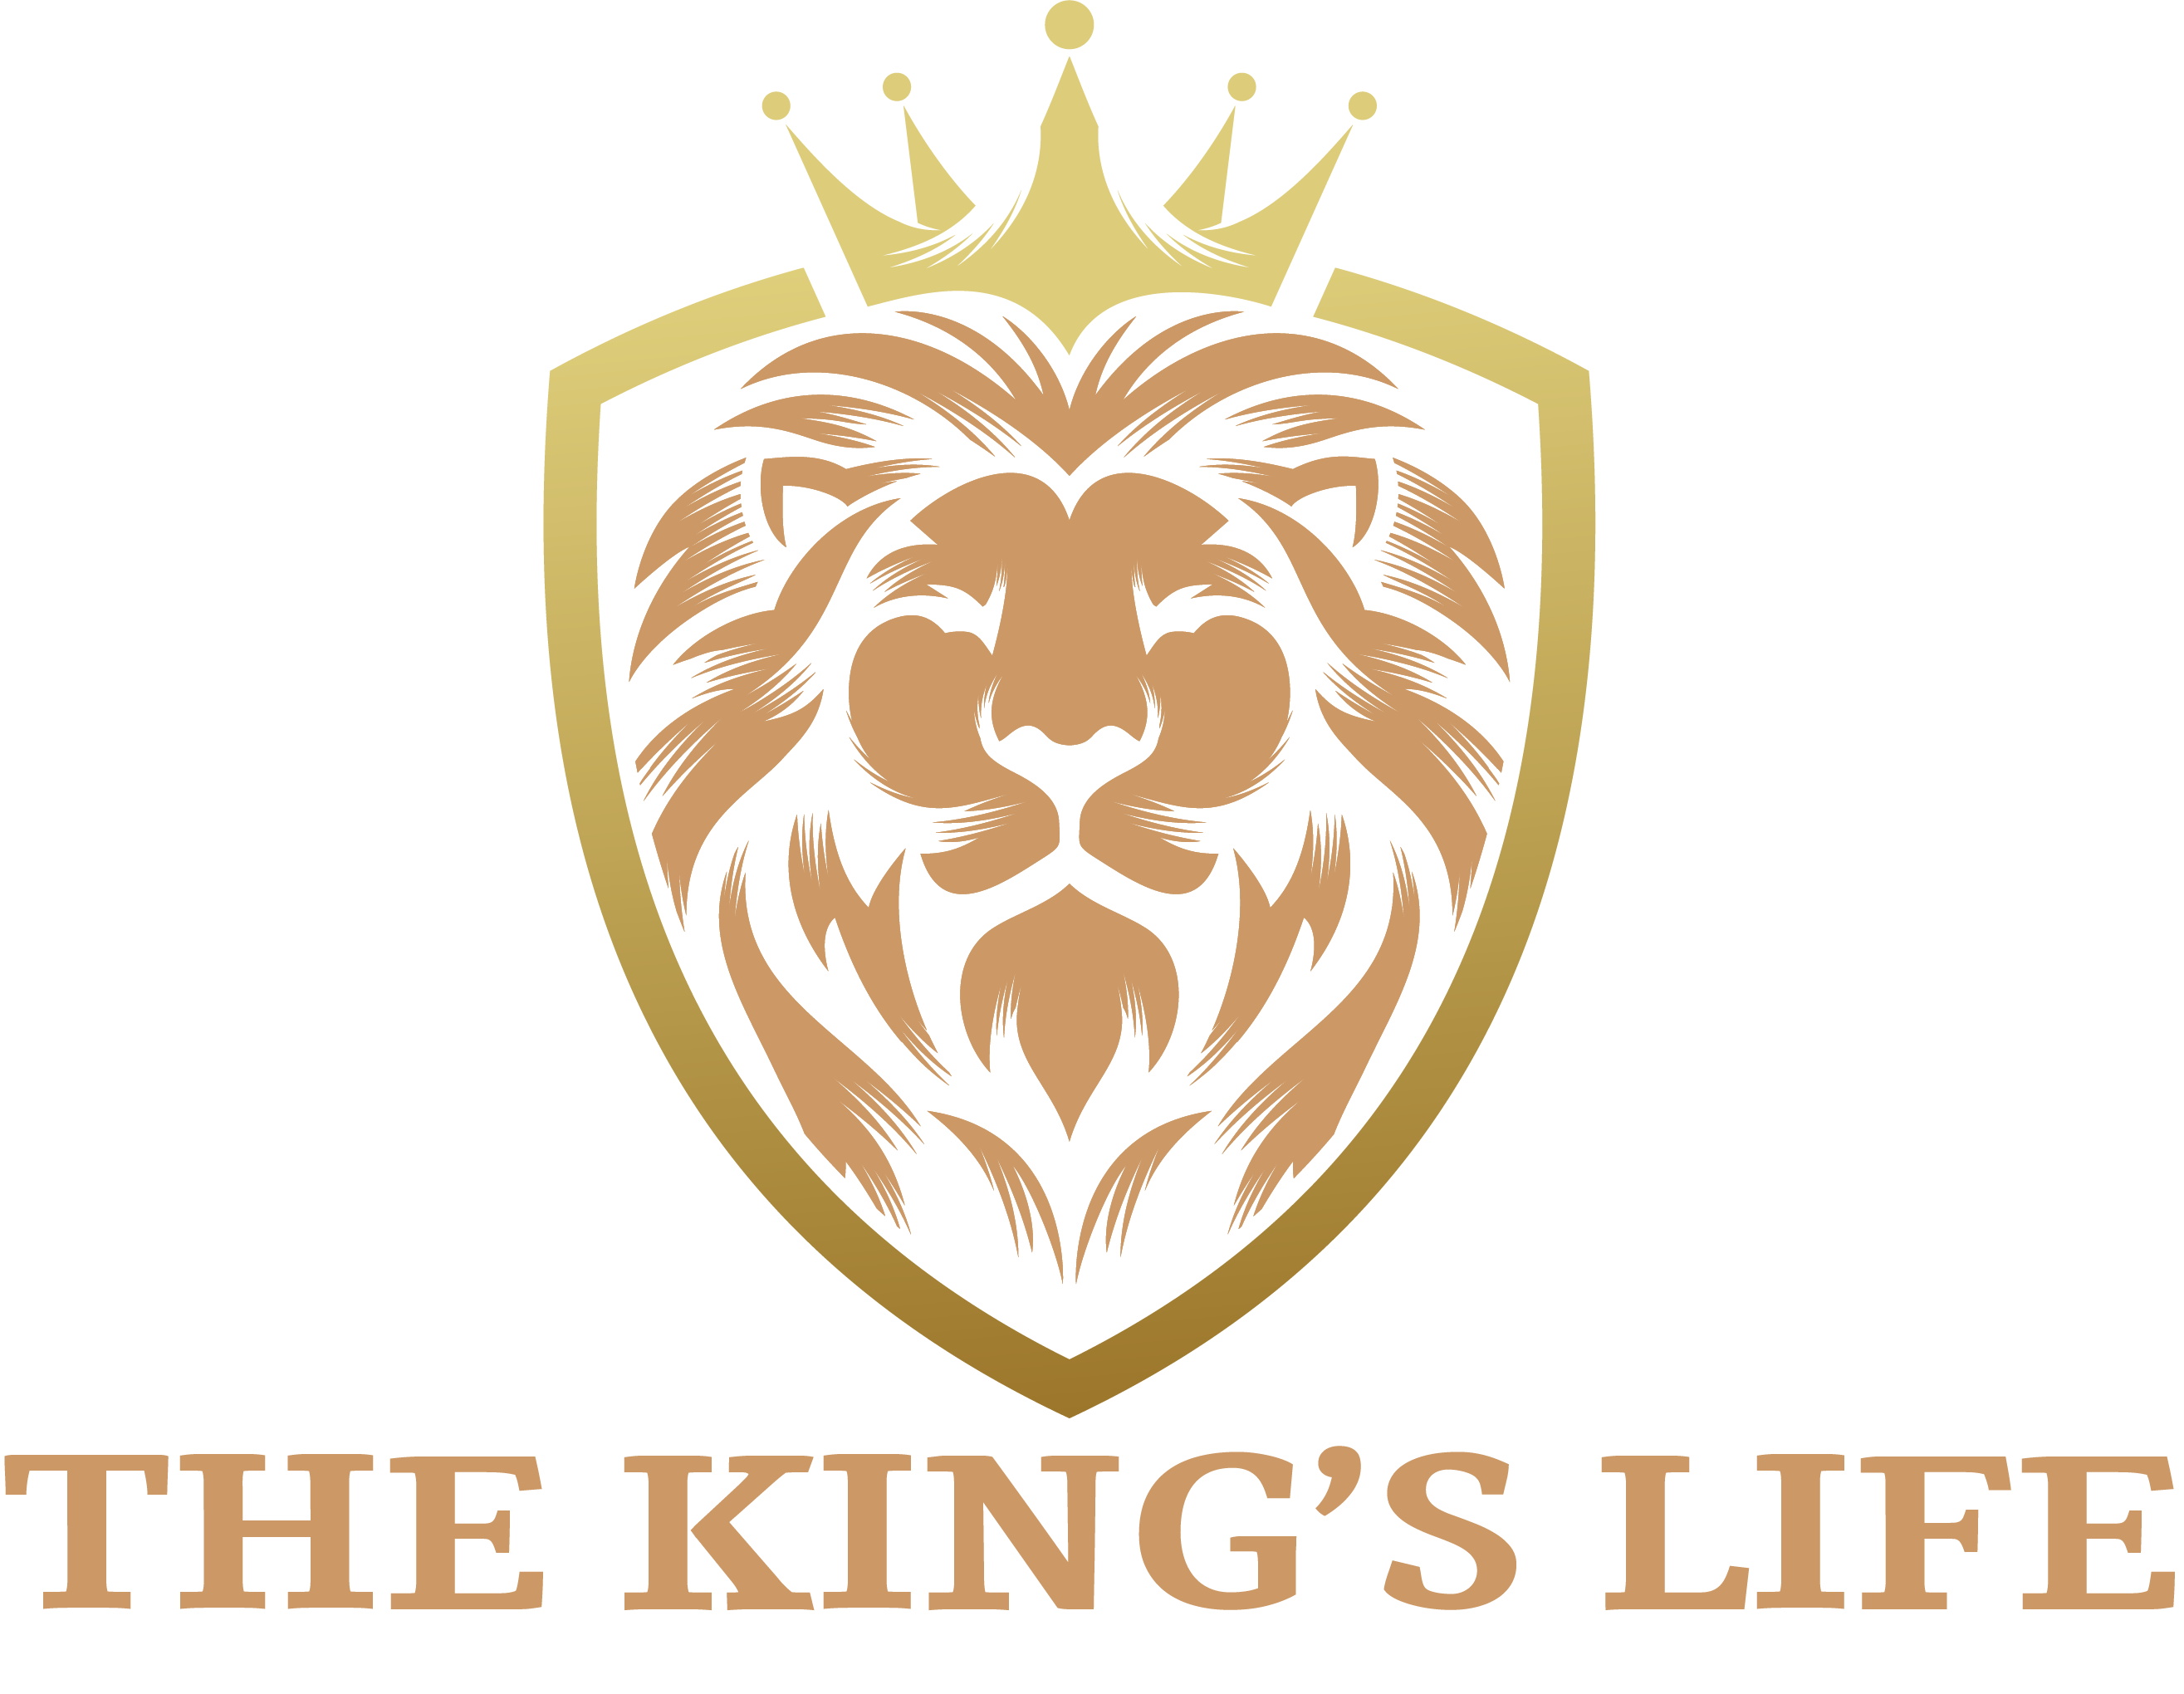 , Louis Dünweber, The King’s Life CEO announces the Launch of the $KING token private and pre-sale (ICO).